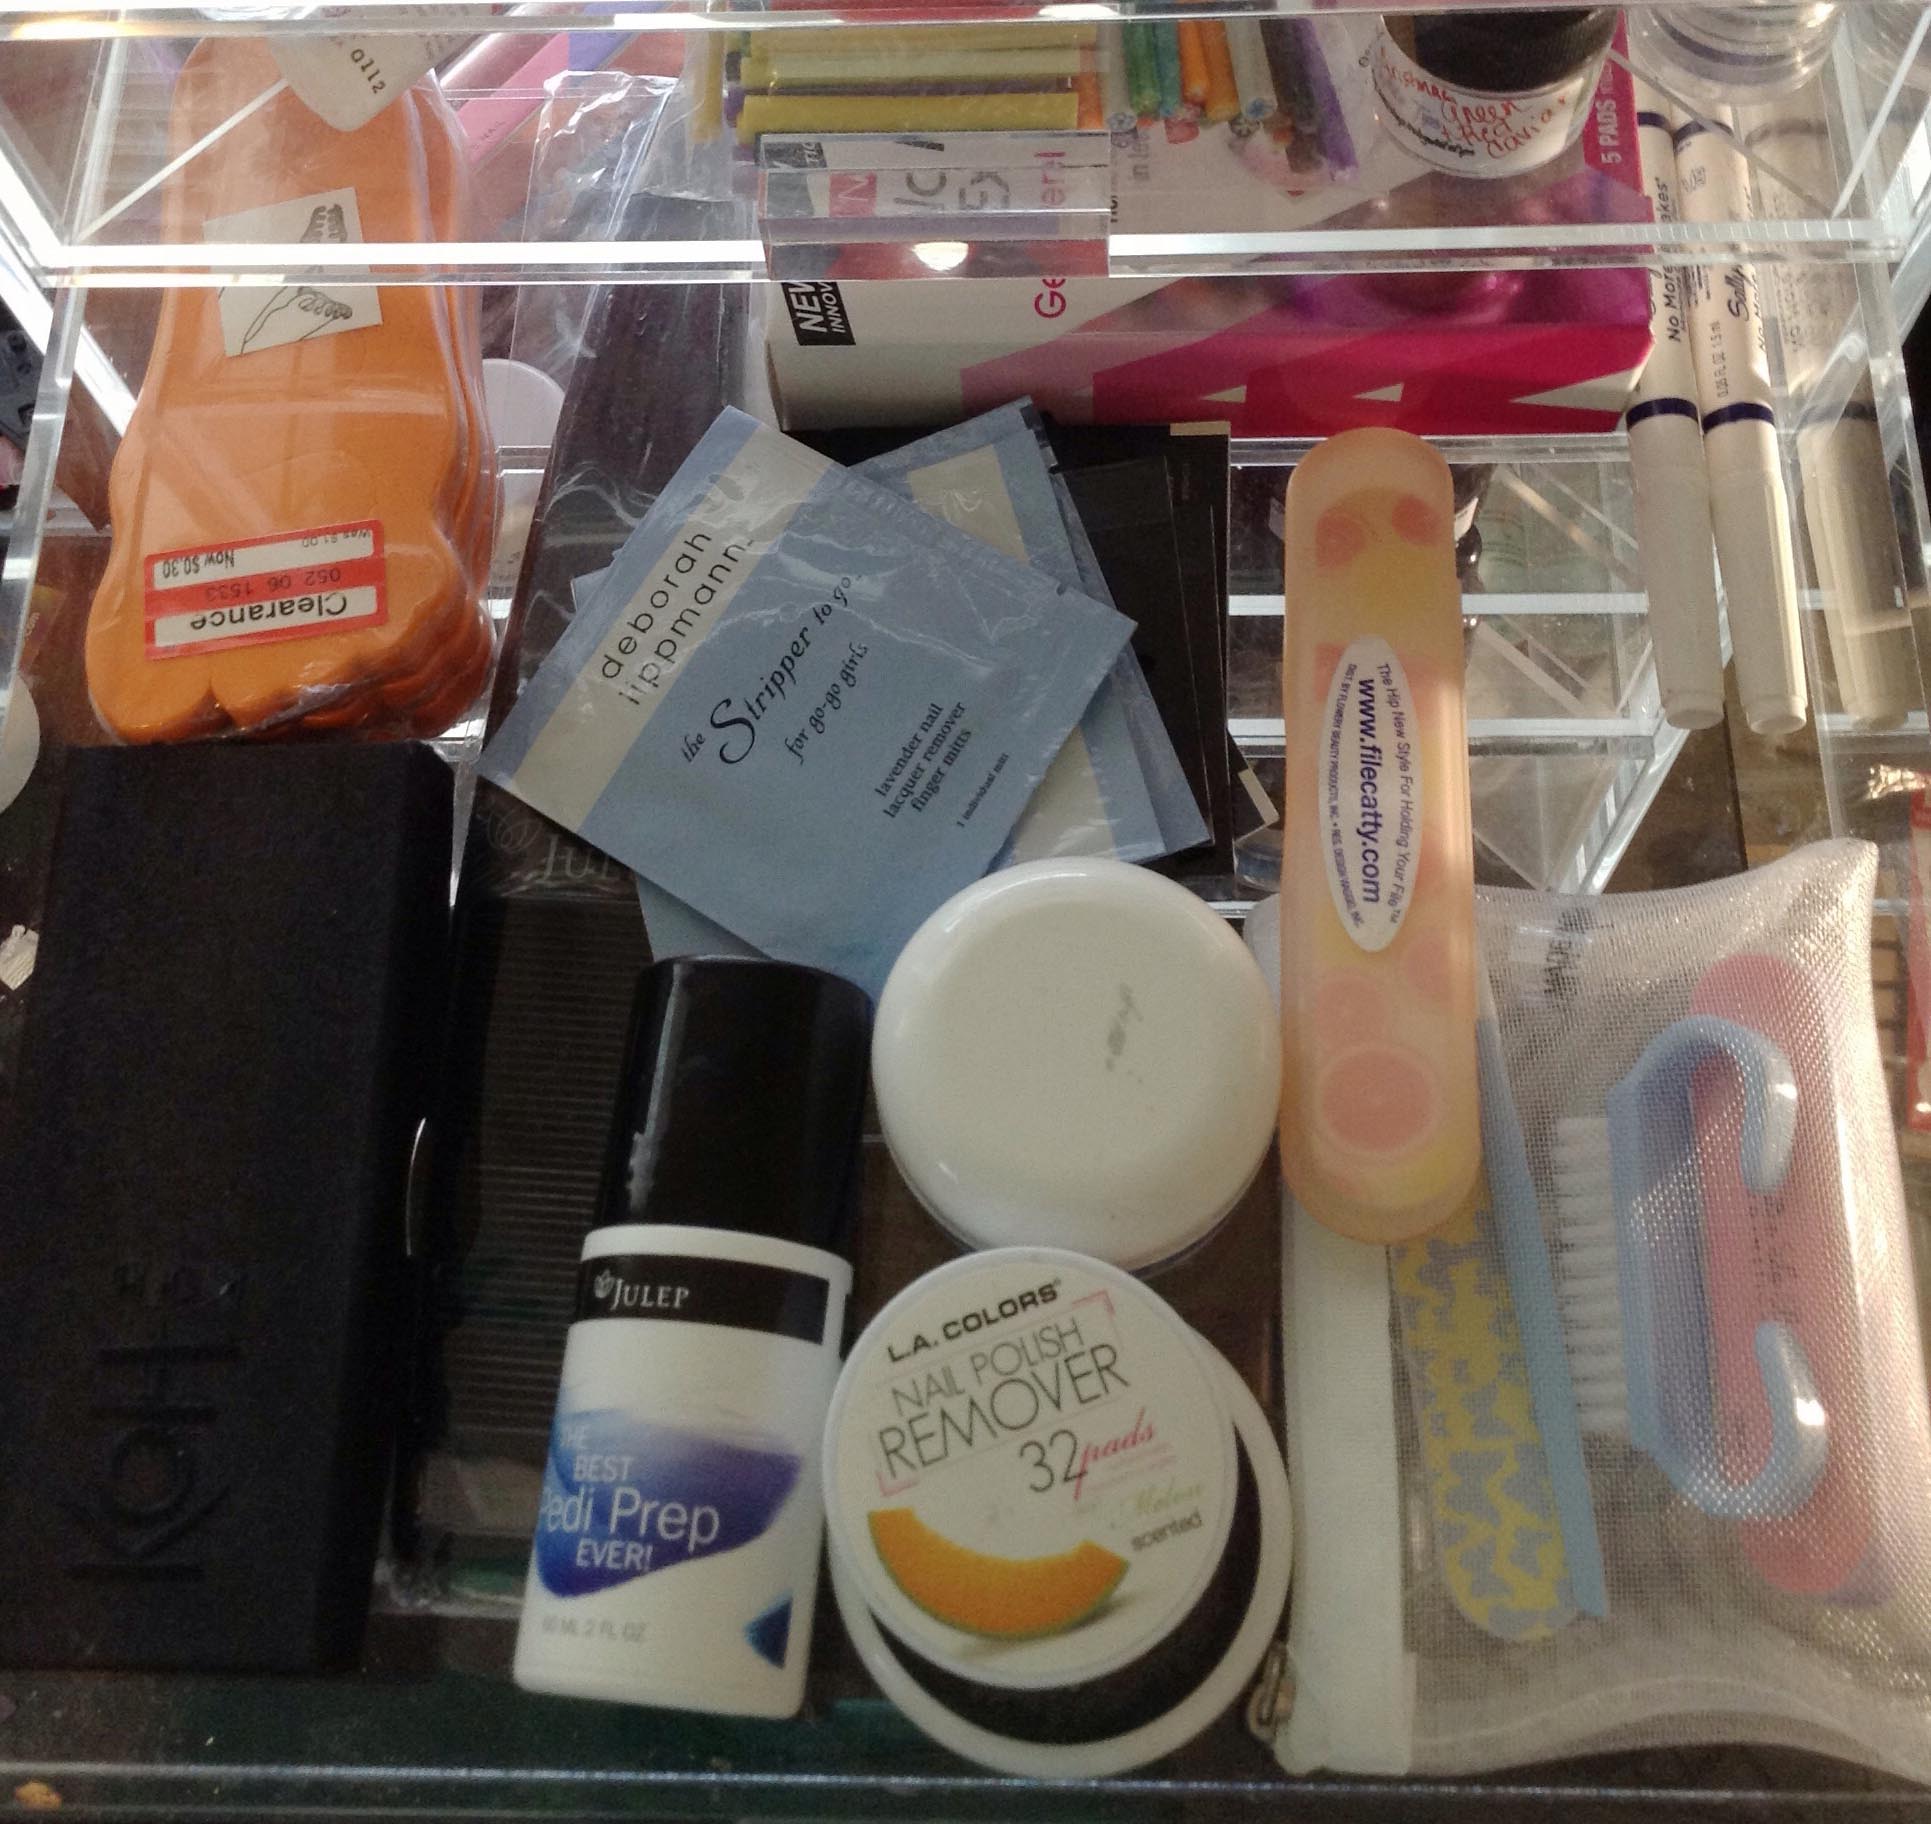 Makeup Storage With The eDiva Acrylic Organizer! (Collab post with